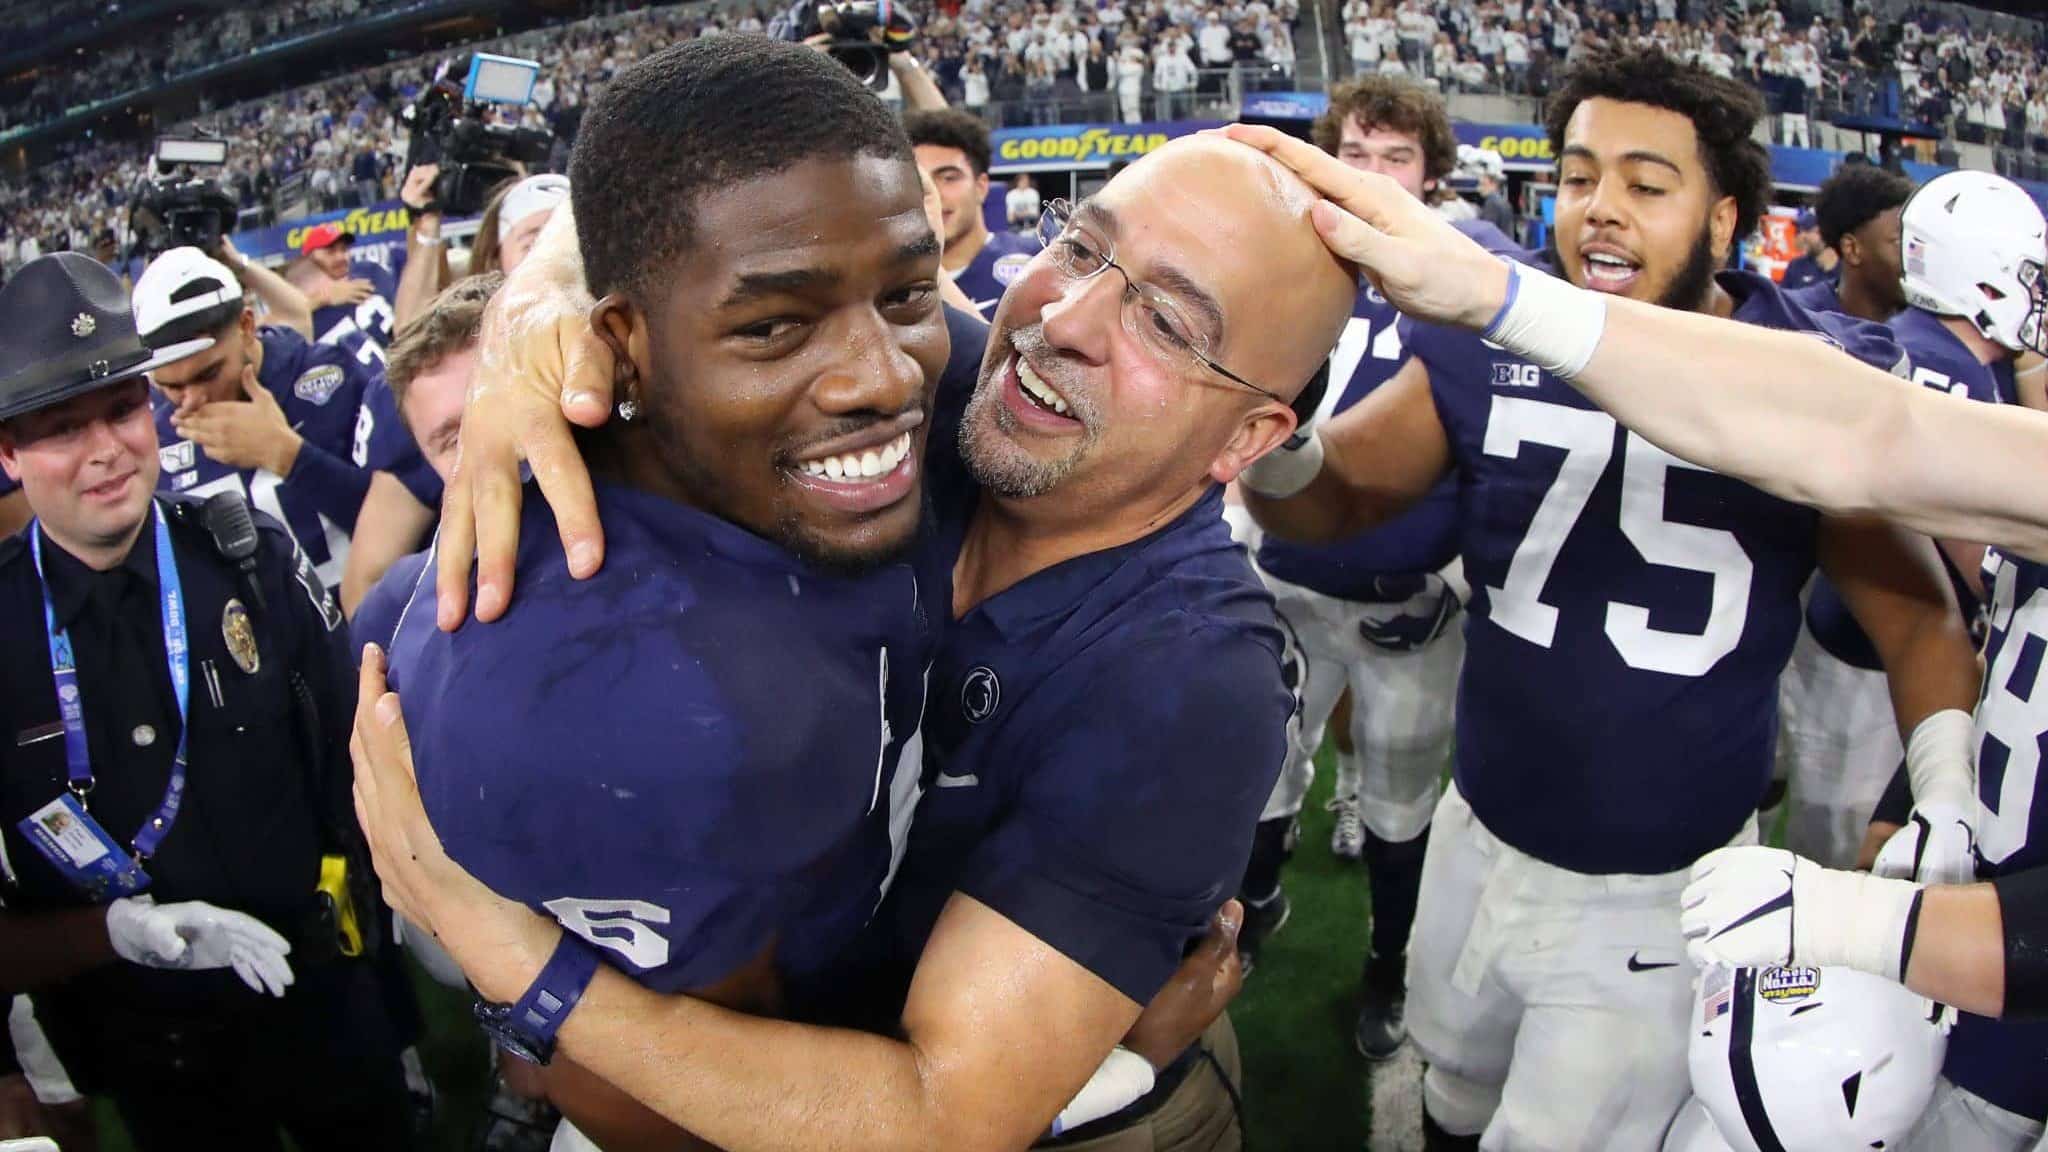 ARLINGTON, TEXAS - DECEMBER 28: Head coach James Franklin of the Penn State Nittany Lions celebrates with Cam Brown #6 of the Penn State Nittany Lions after the Nittany Lions beat the Memphis Tigers 53-39 at AT&T Stadium on December 28, 2019 in Arlington, Texas.